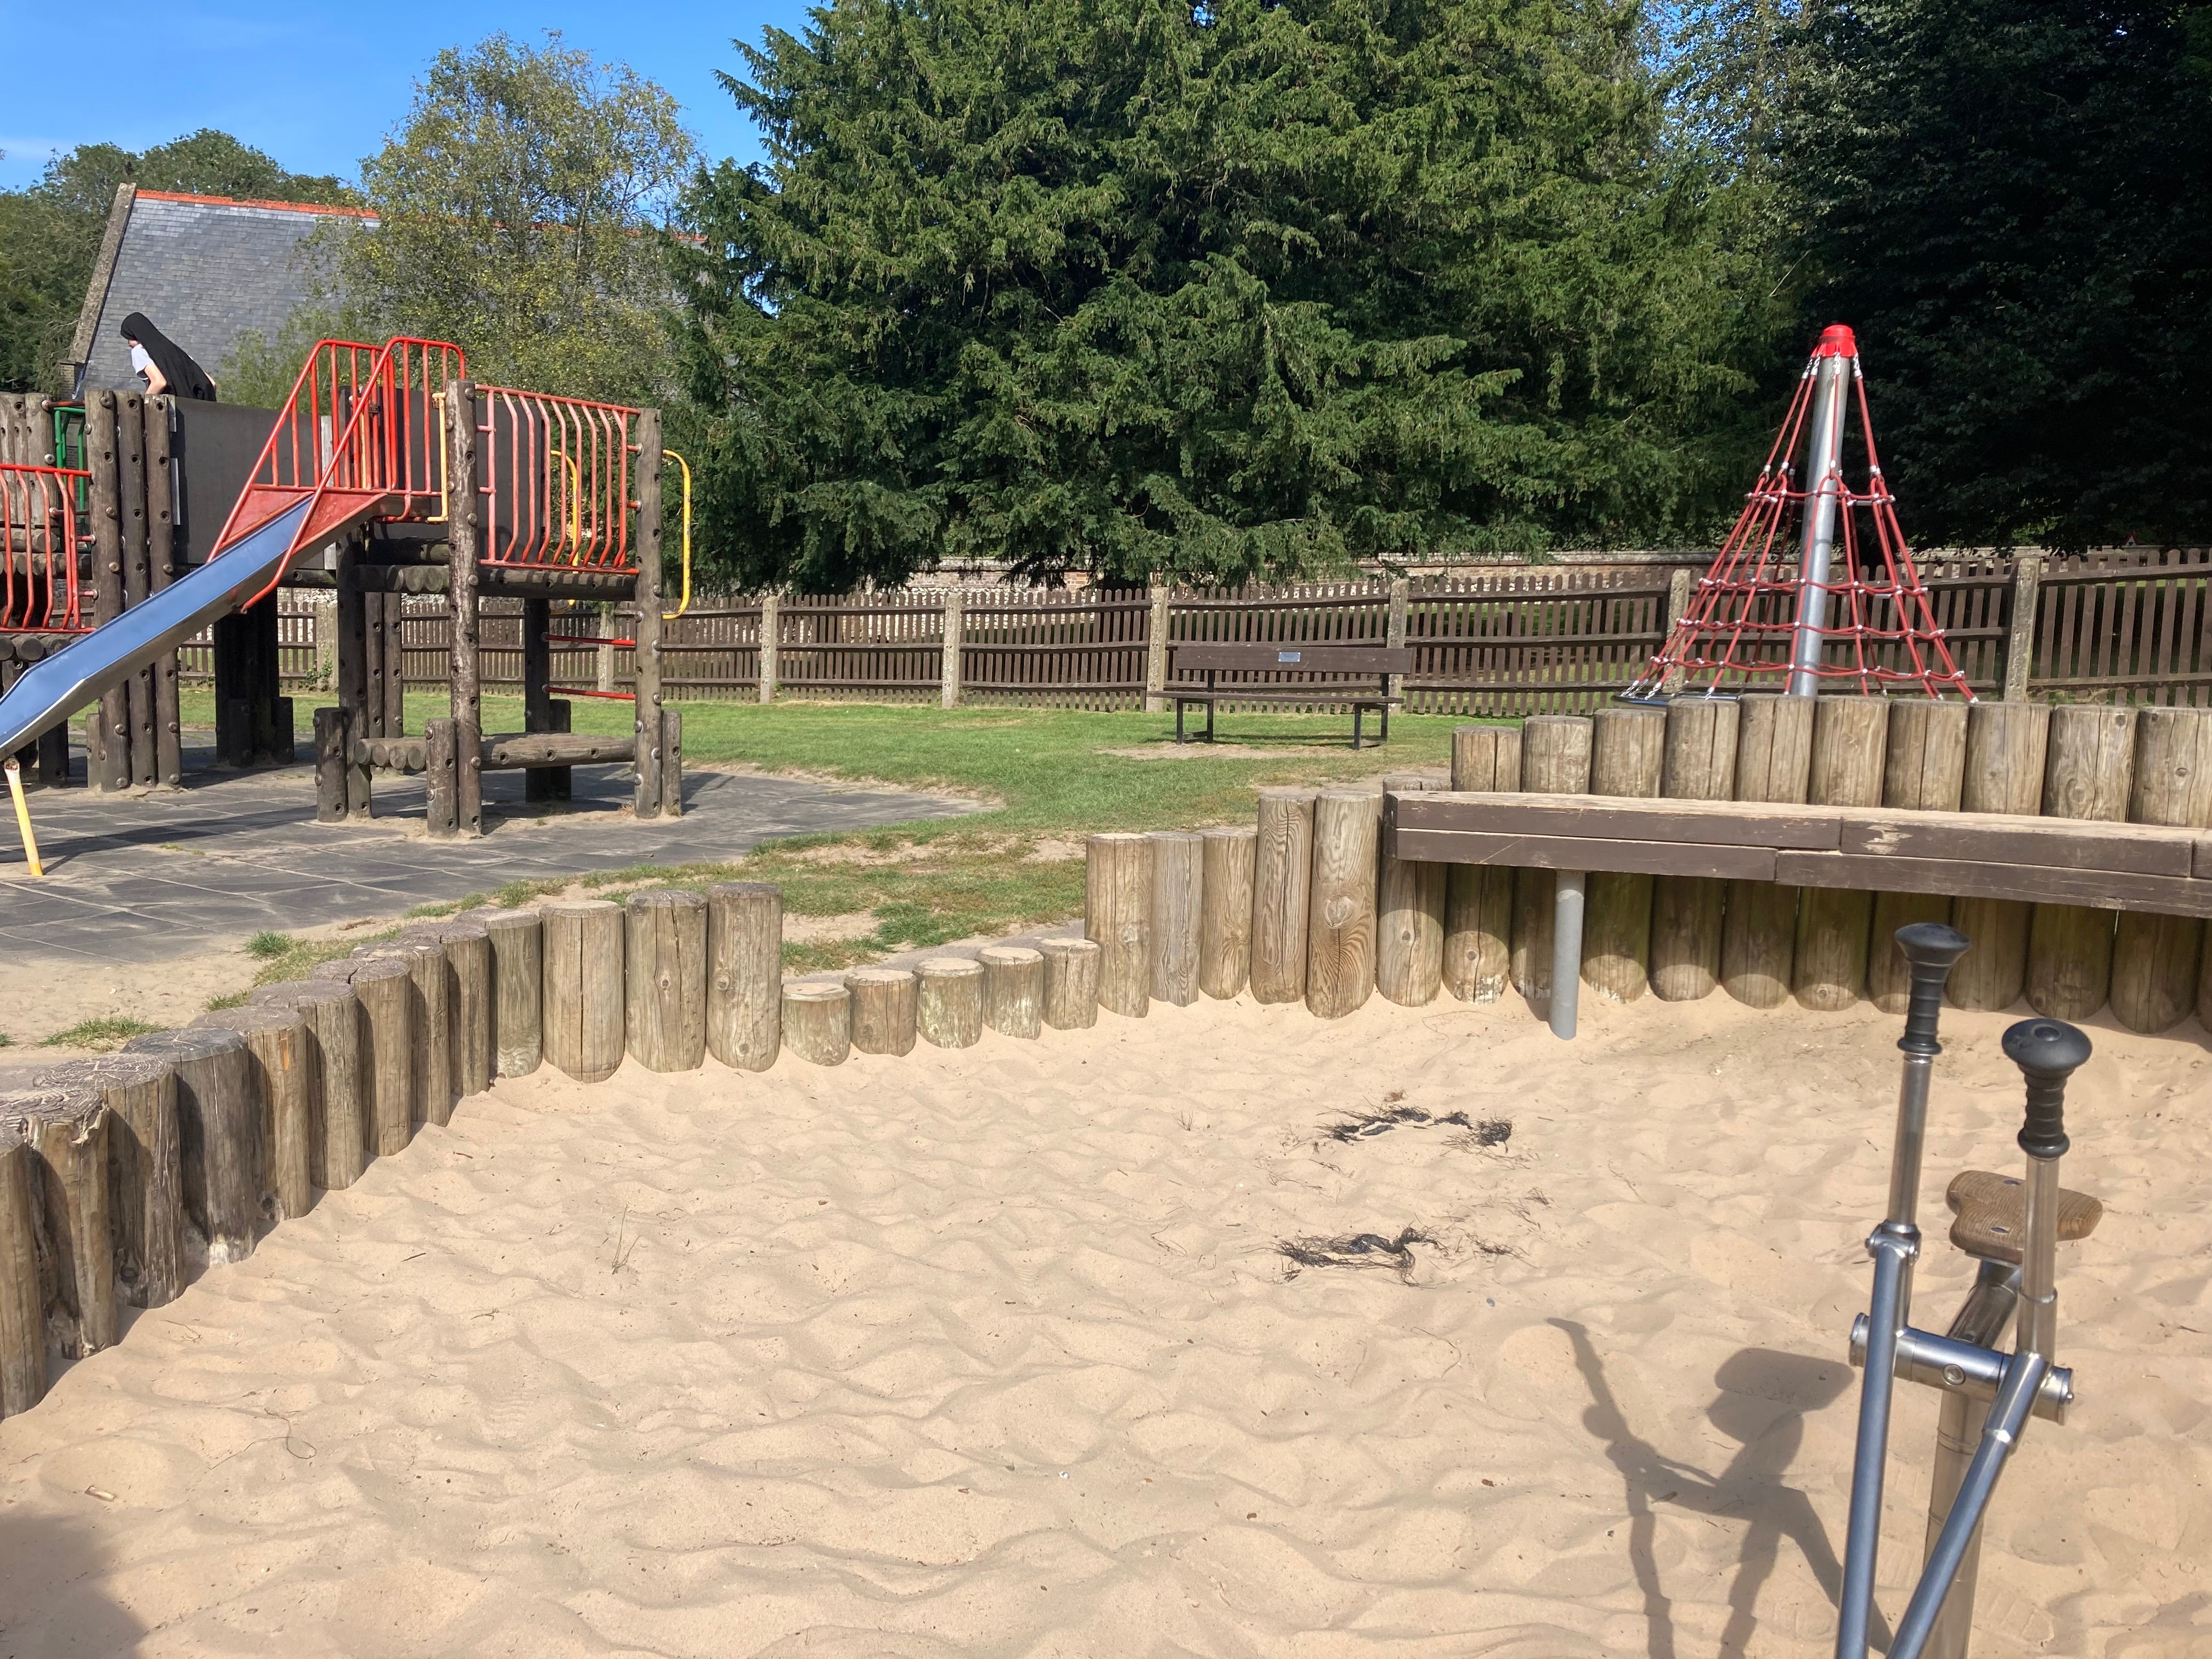 The sandpit in the play area at Kearnsey Abbey